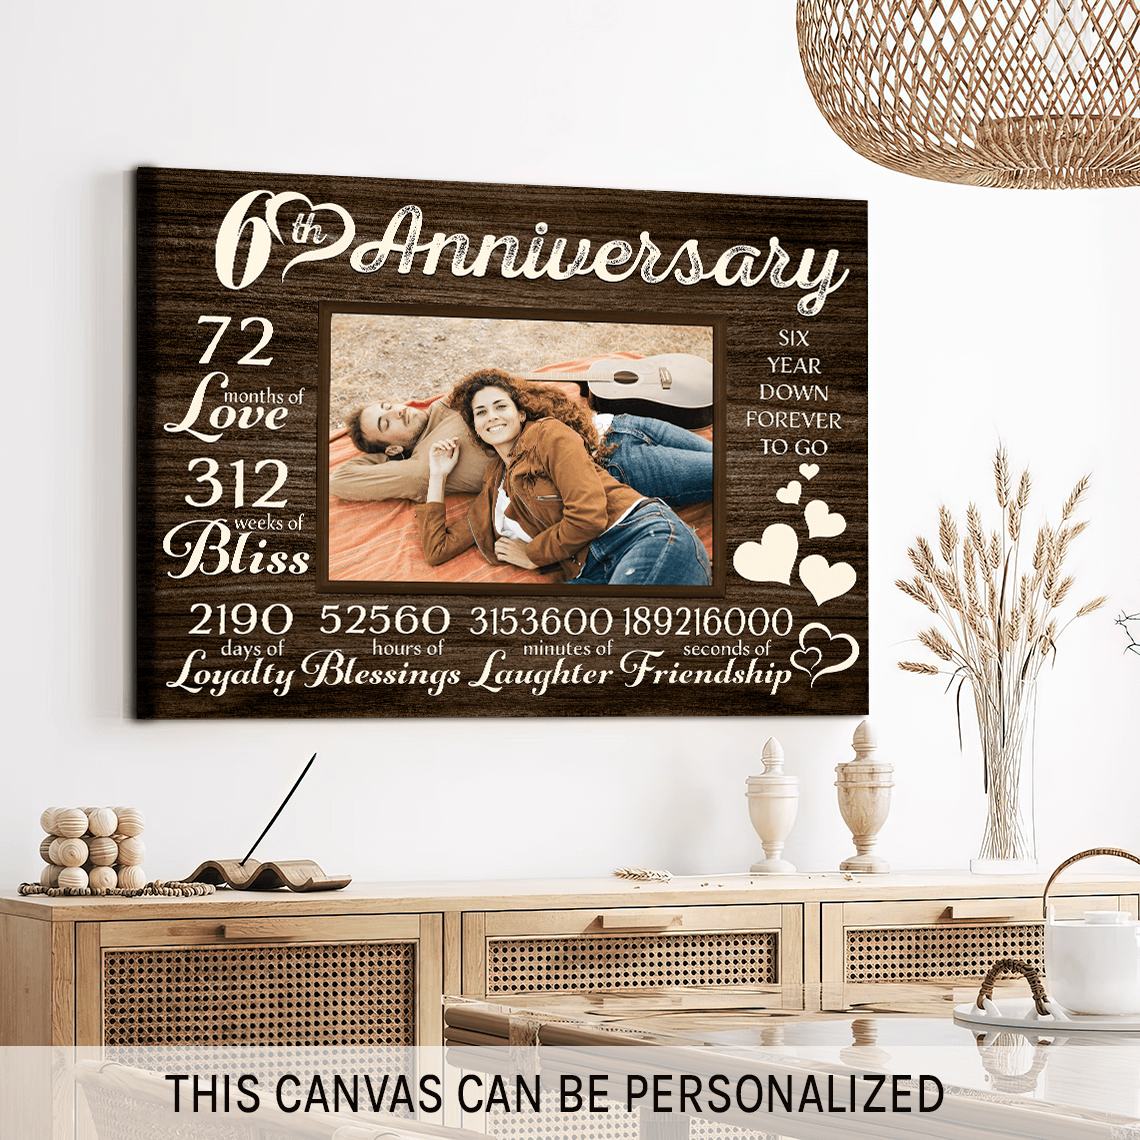 Personalized 6 year anniversary gift for him for her - 72 months of love - custom Couple Canvas print - MyMindfulGifts